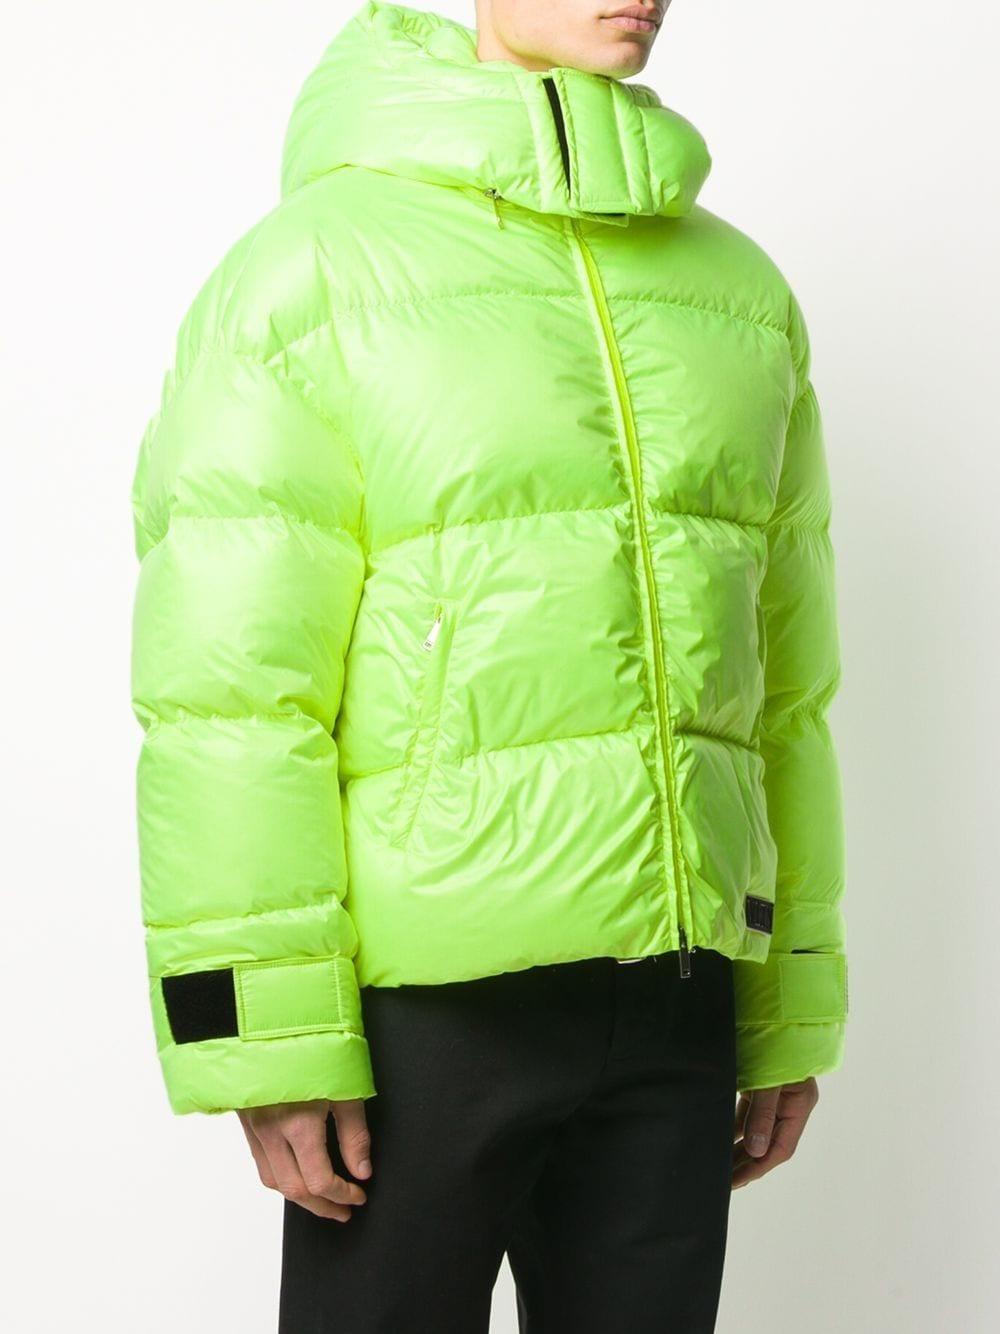 Valentino Synthetic Padded Puffer Jacket in Yellow for Men - Lyst